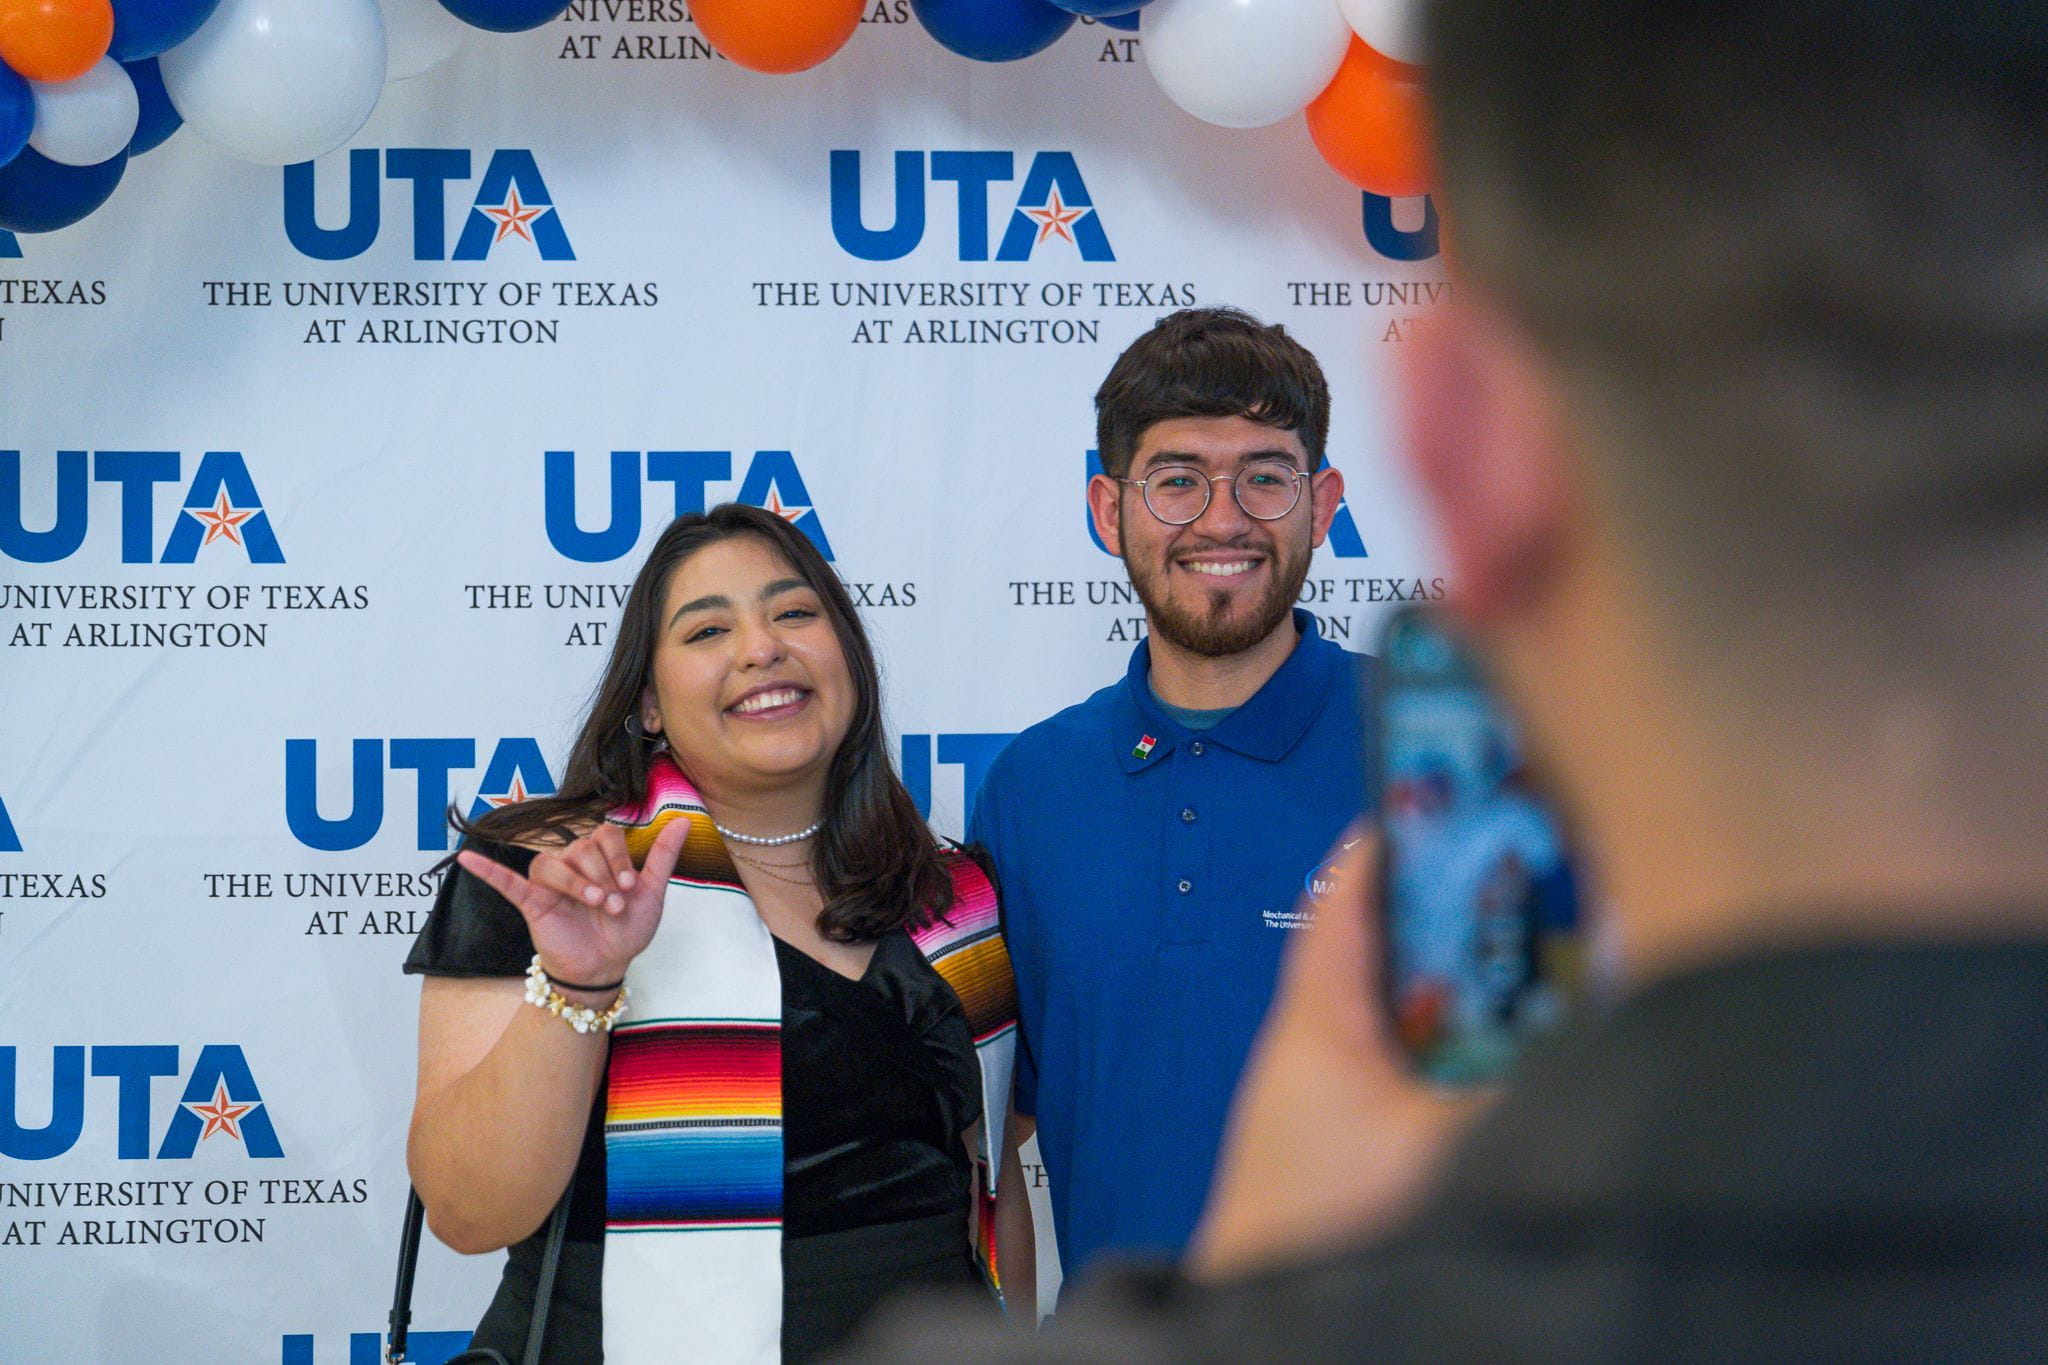 UTA was named tops in many categories in Hispanic Outlook magazine." _languageinserted="true